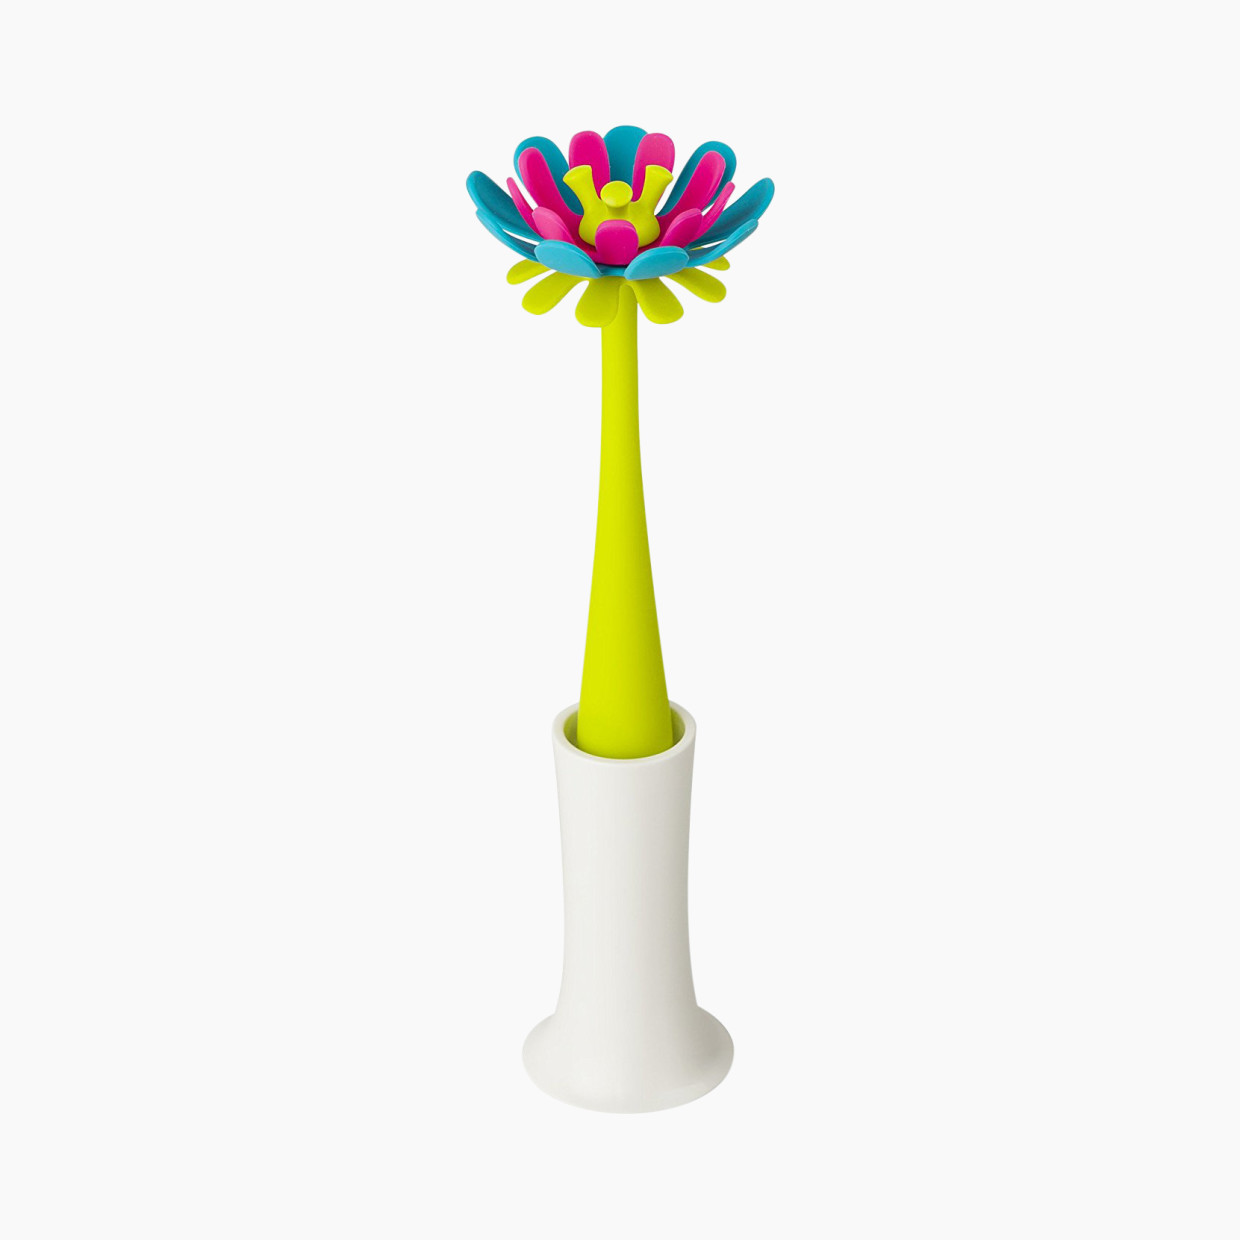 Boon Forb Silicone Bottle Brush - Blue/Pink.